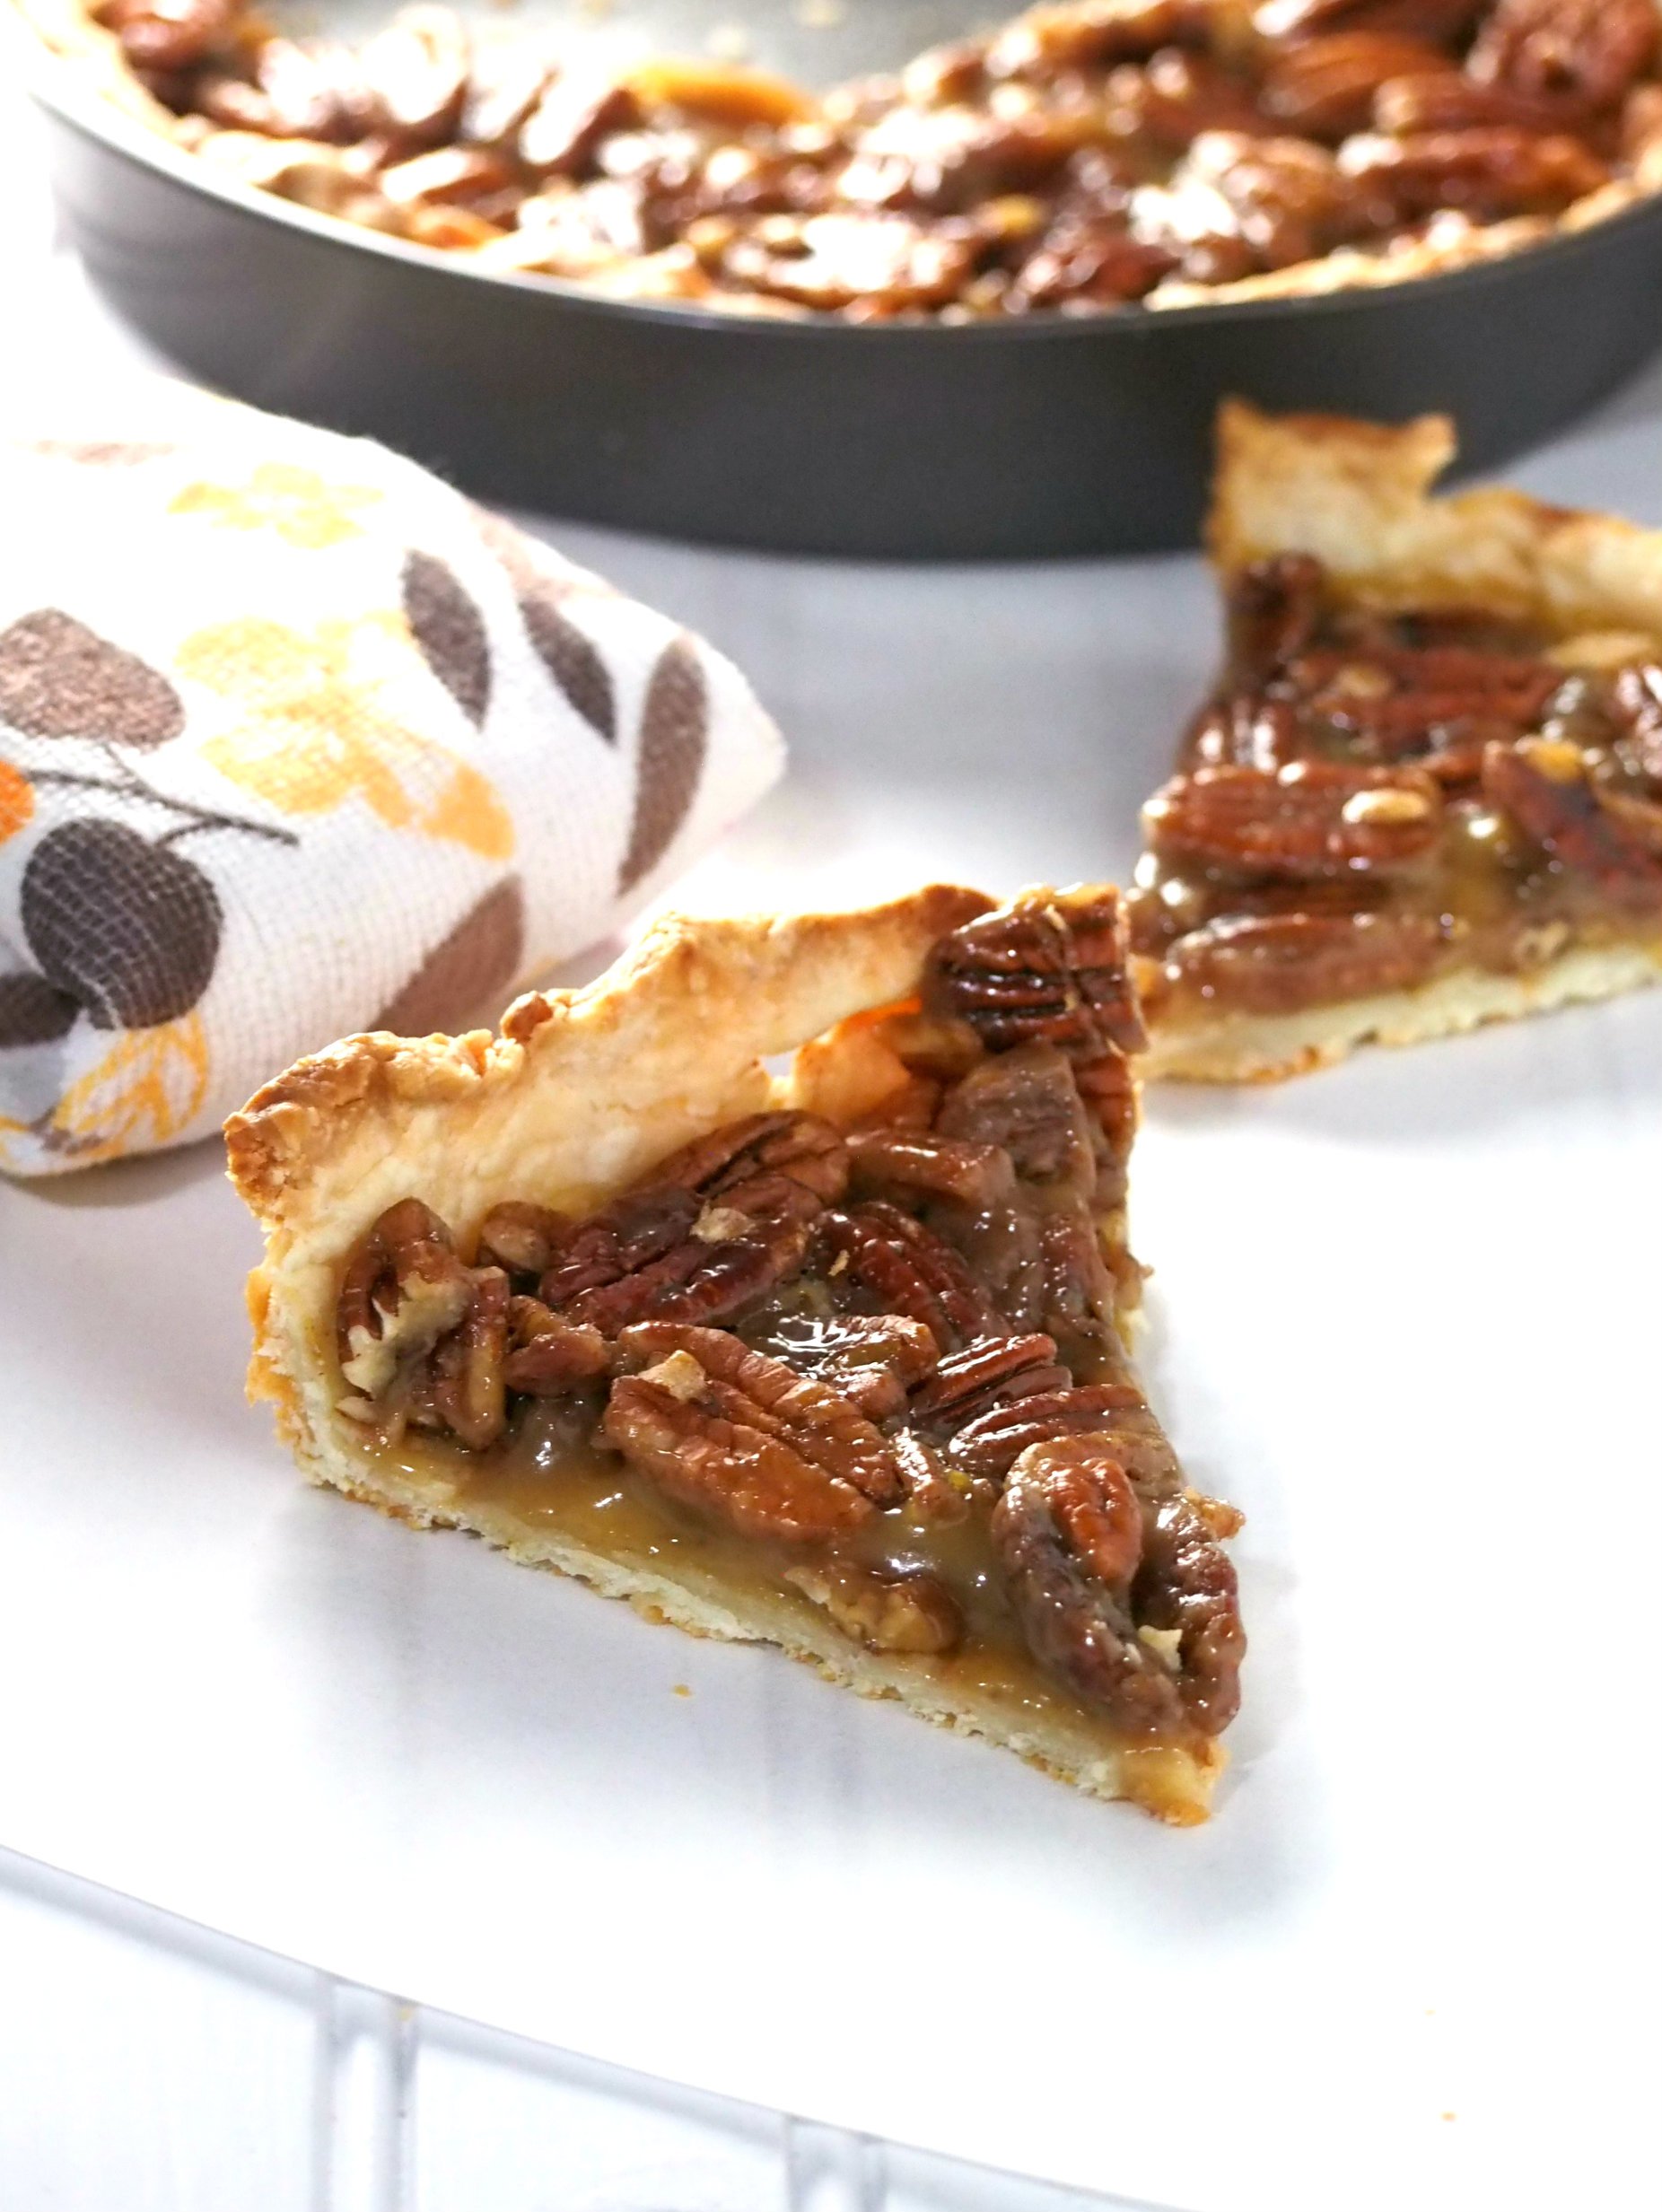 The best pecan pie ever. Just moderately sweet and loaded with crunchy pecan goodness.